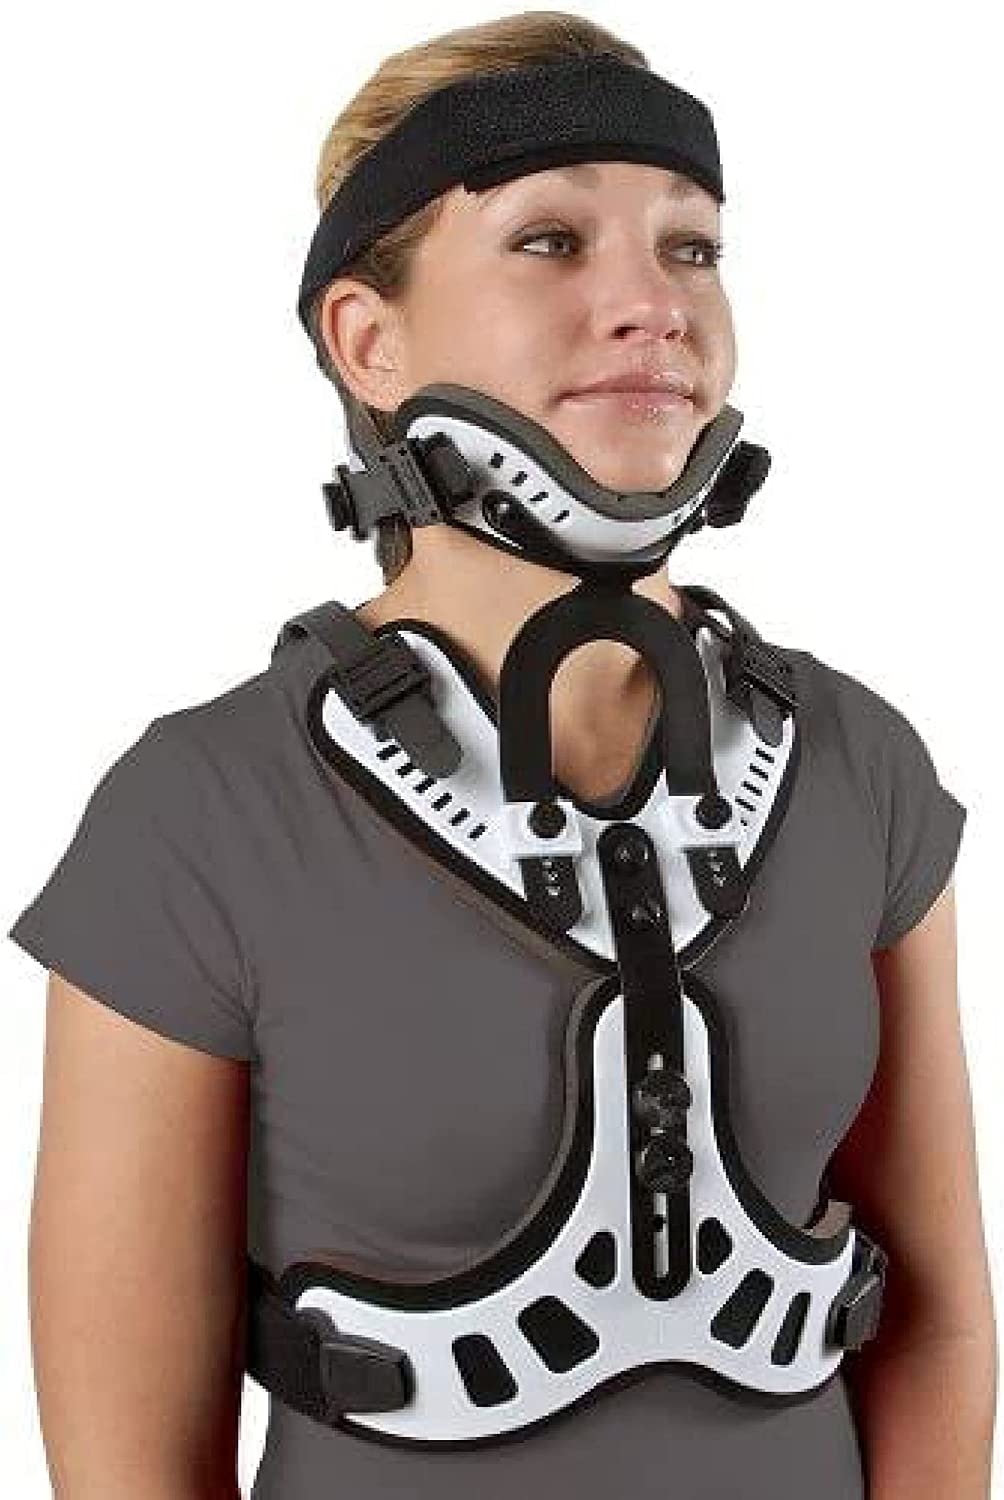 <p>- orthosis that encloses the skull</p><p>- it also includes: forehead band and body jacket</p><p>- light weights than the halo vest; no pins (no “invasive” support)</p><p>- less restriction of motion compared to halo vest</p>